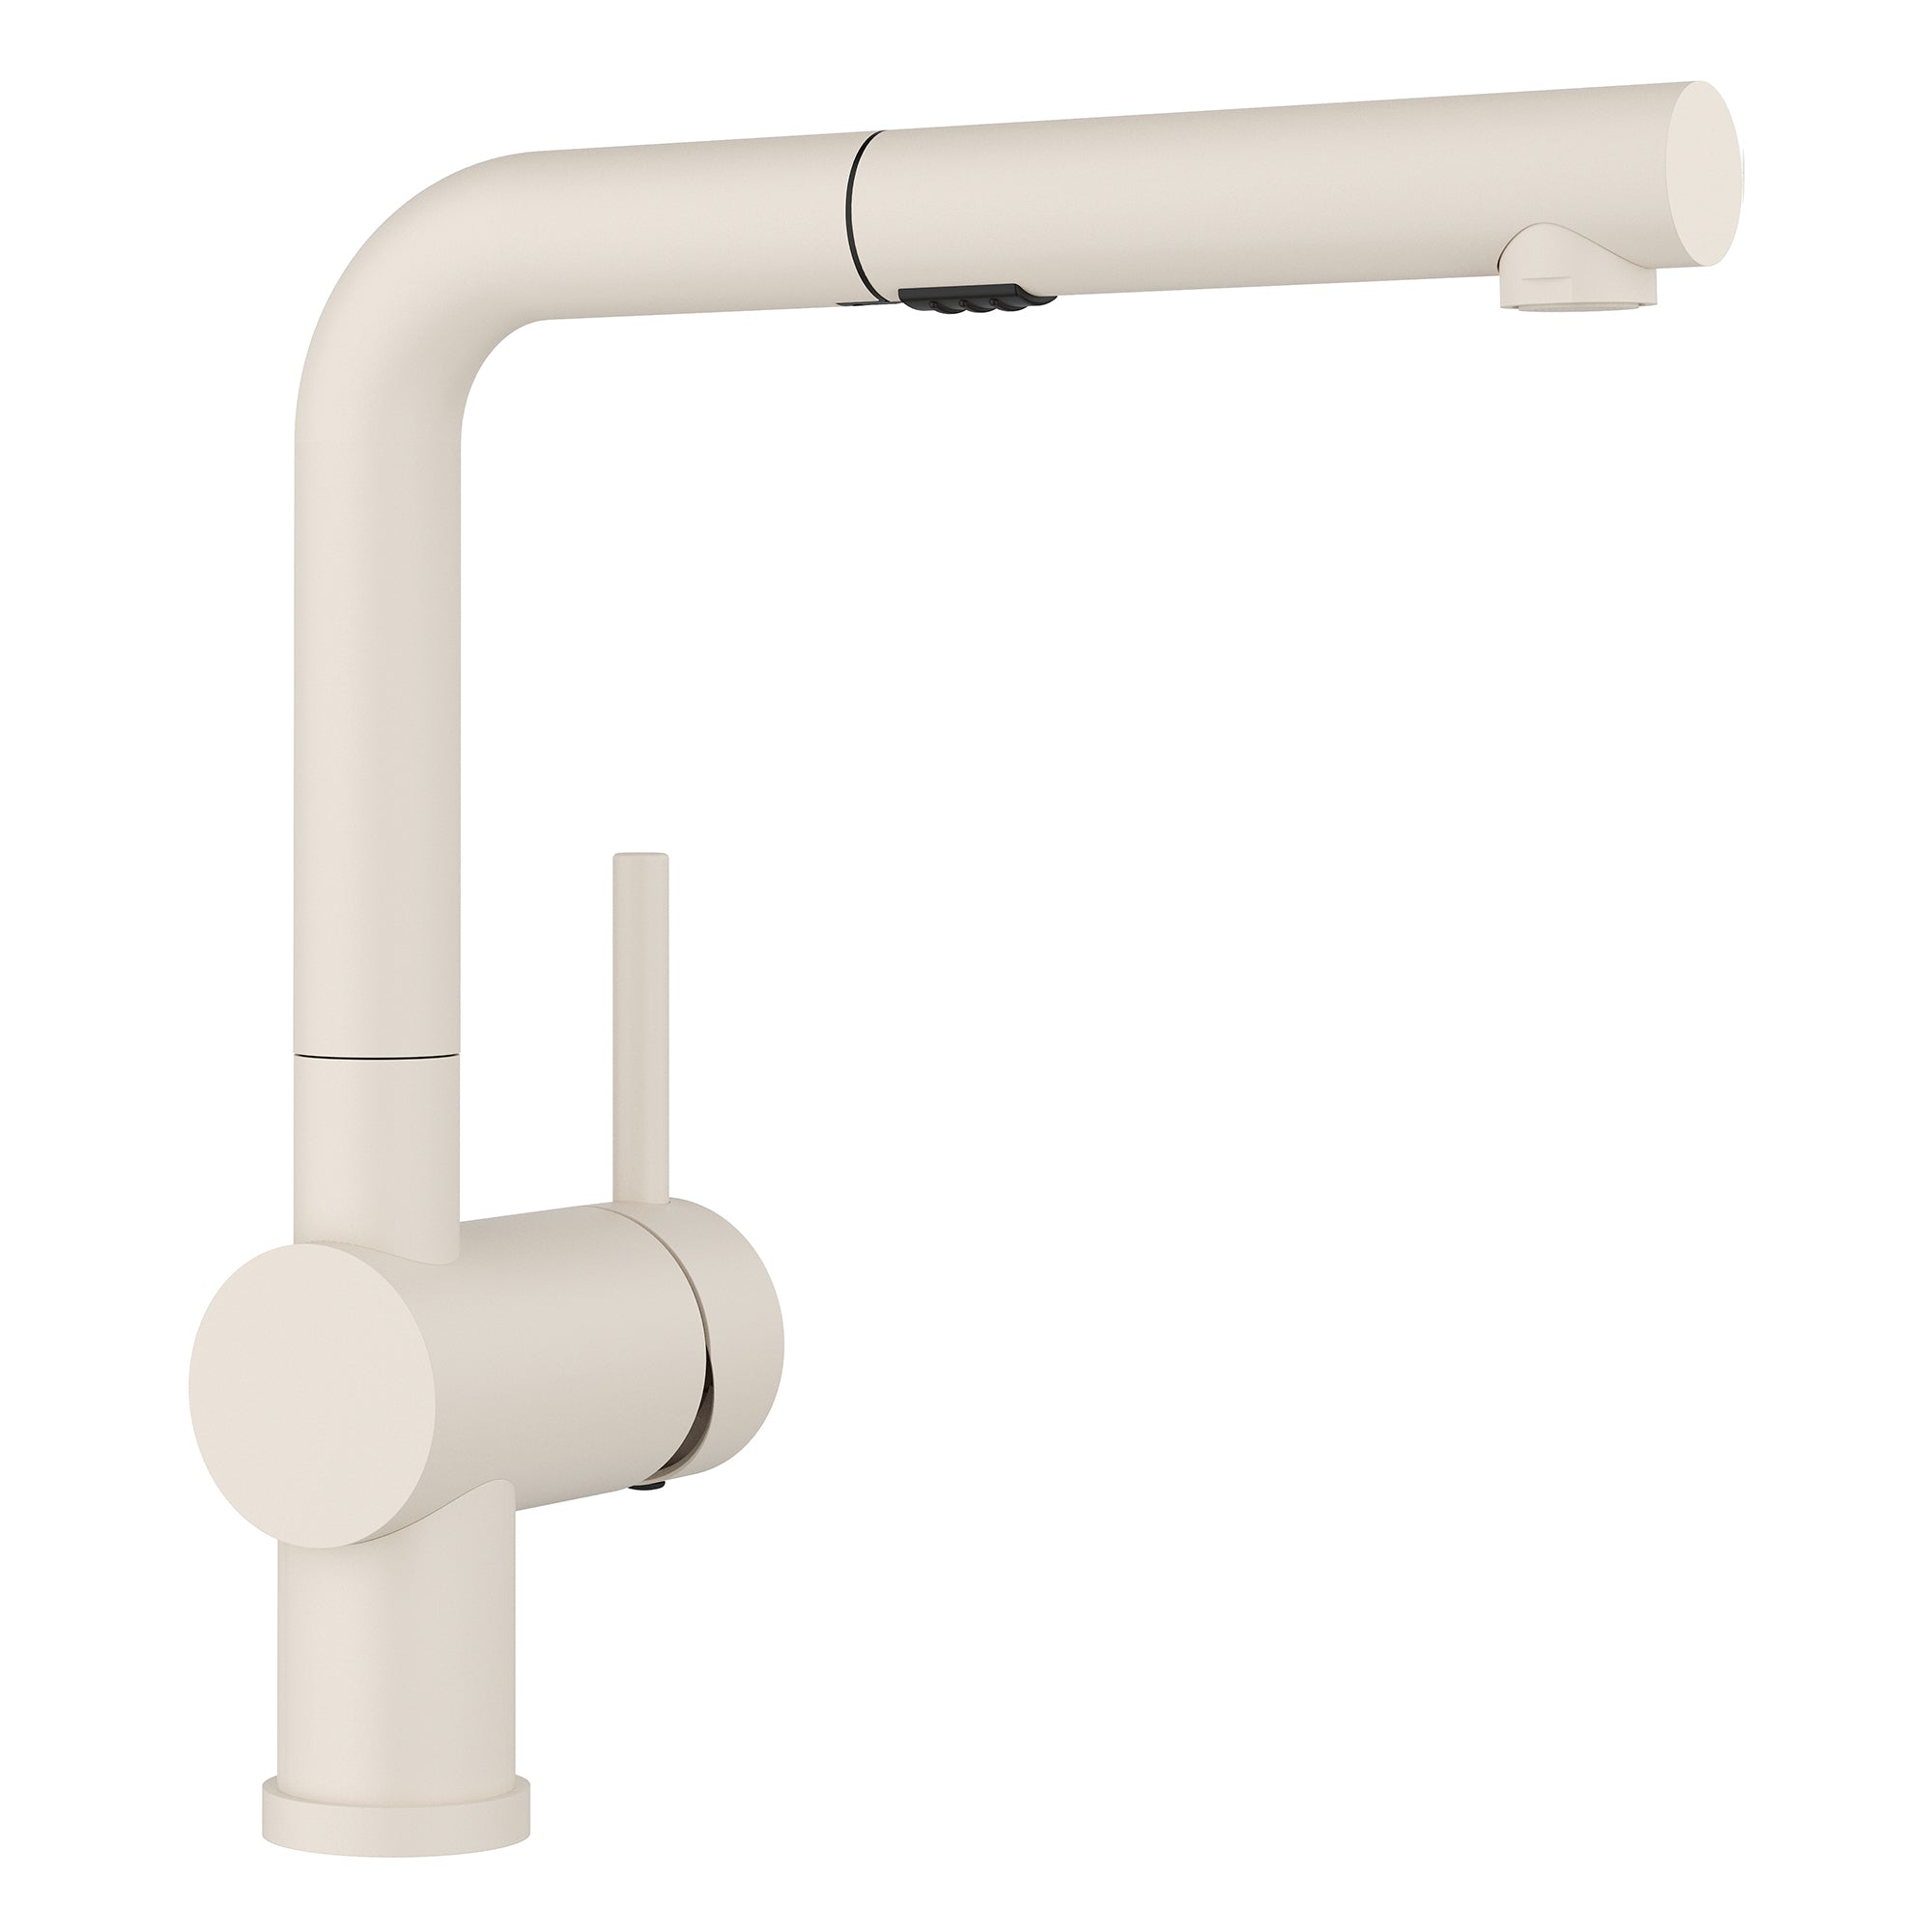 BLANCO Linus Pull-Out Kitchen Faucet  